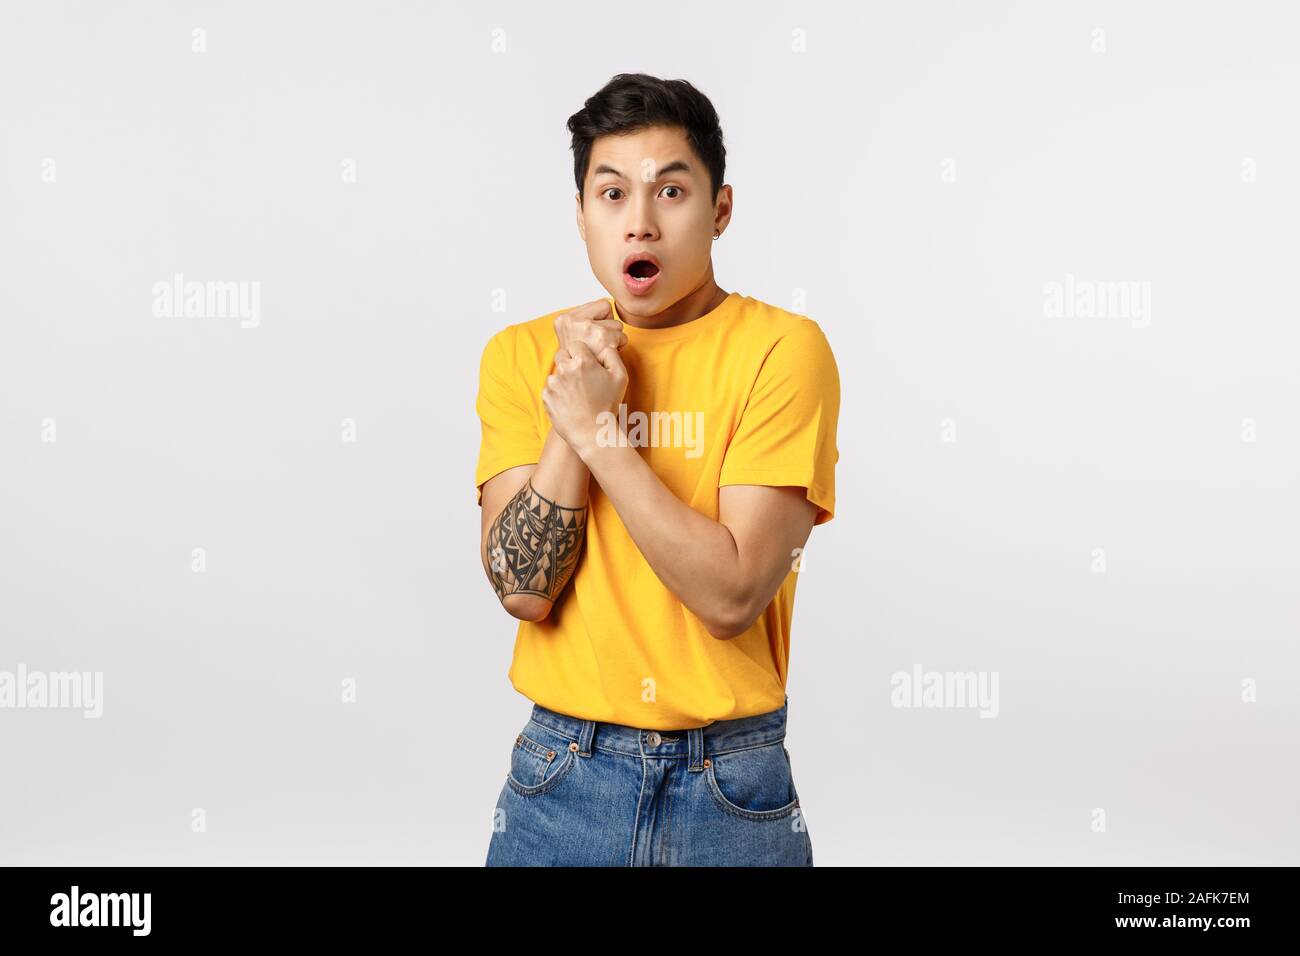 Sensetive and shocked, scared young asian guy with tattoos, pull hand back, press arm to chest insecure and afraid, gasping open mouth, look like Stock Photo